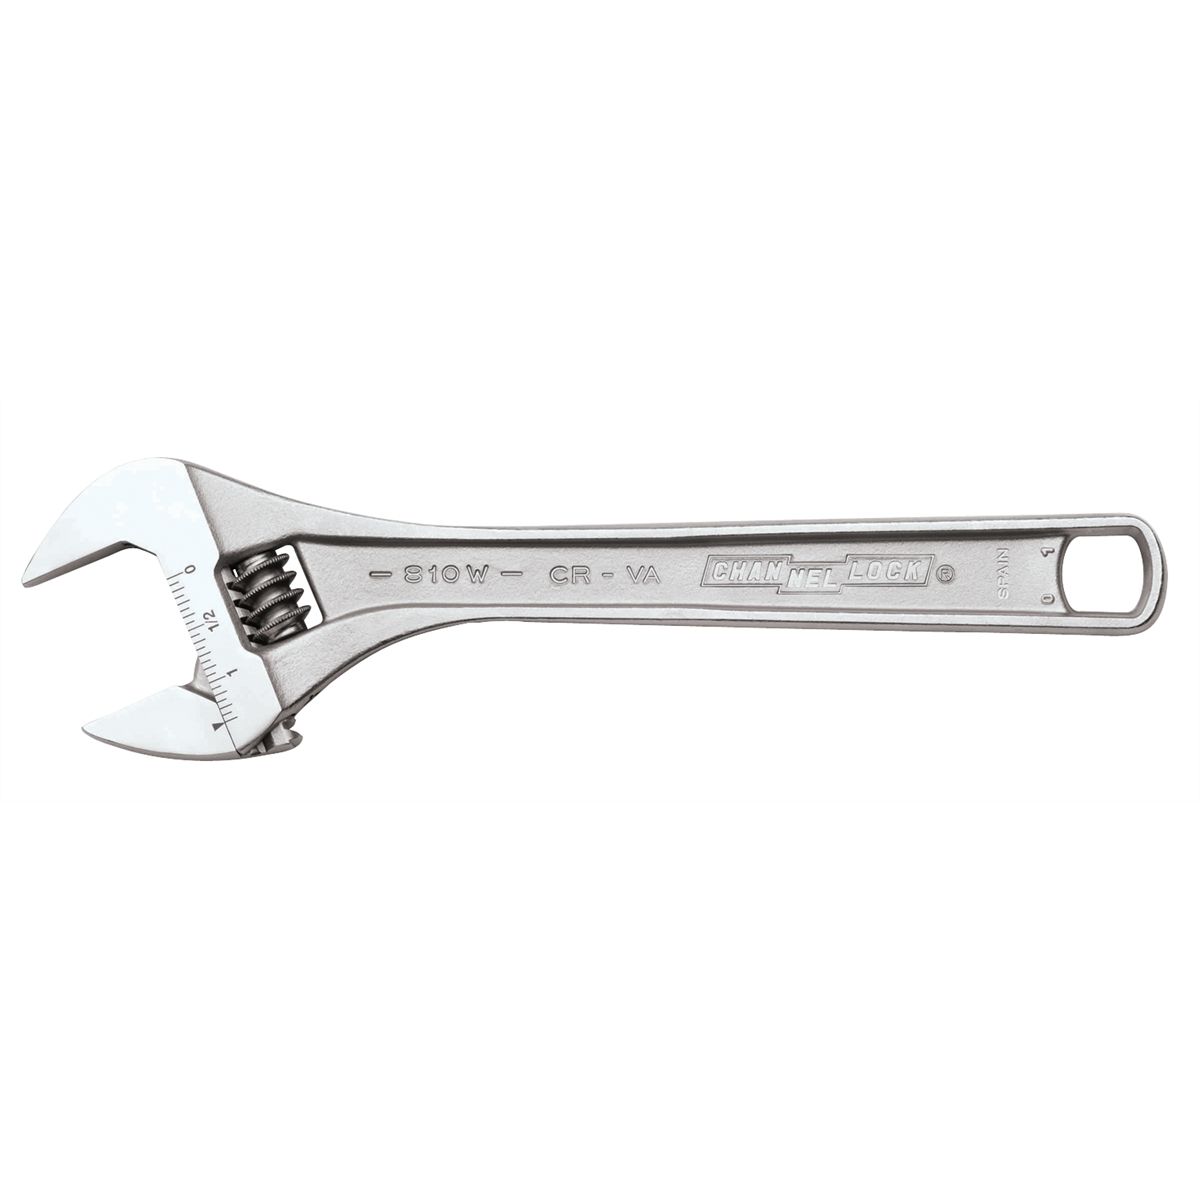 Chrome Adjustable Wrench - 10 In